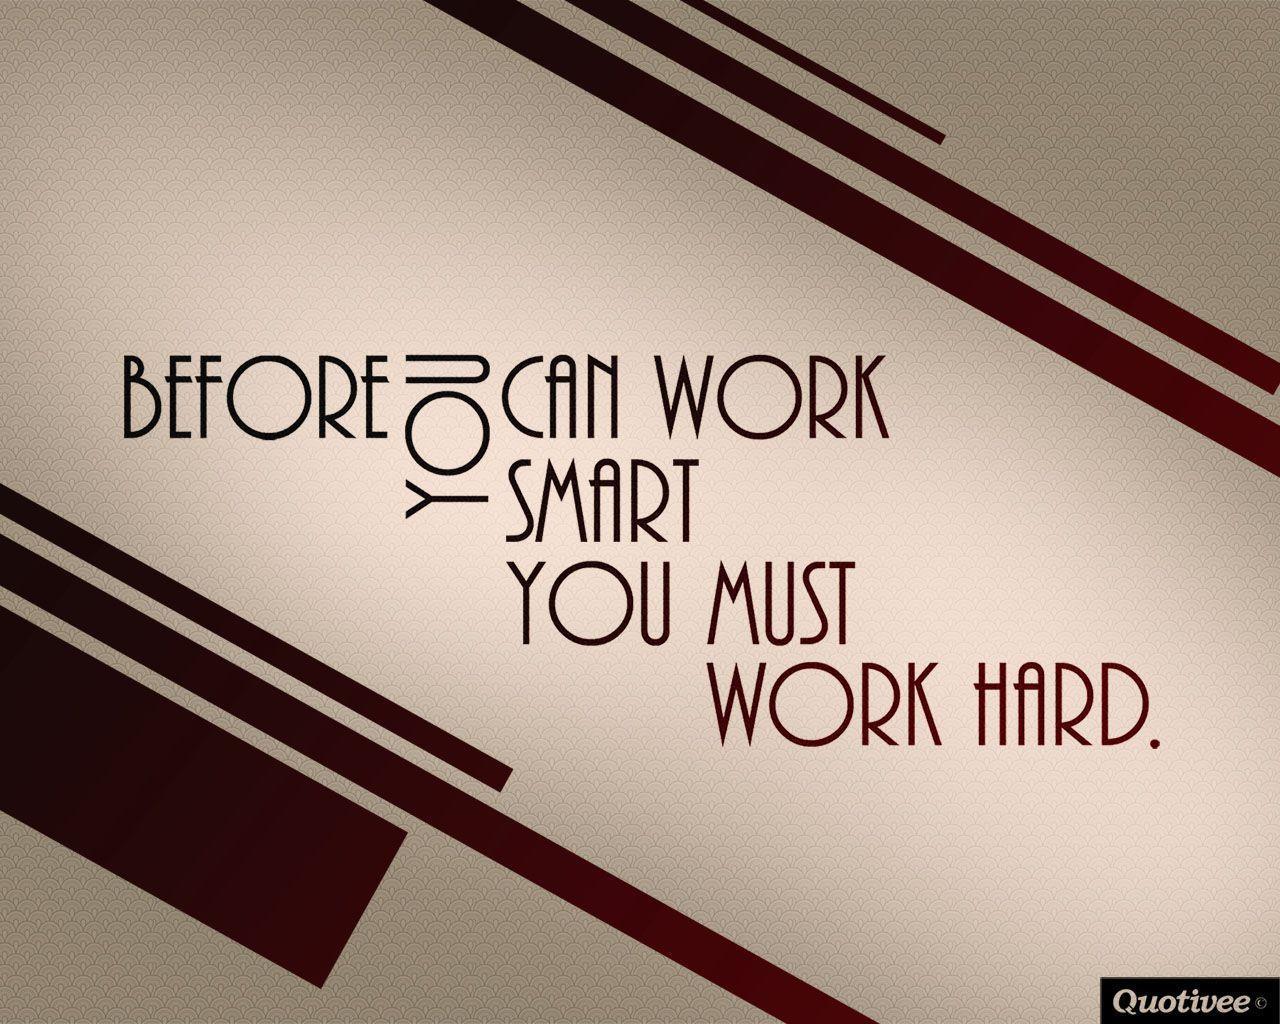 Motivational Wallpaper on Work Hard: Before you can work smart you